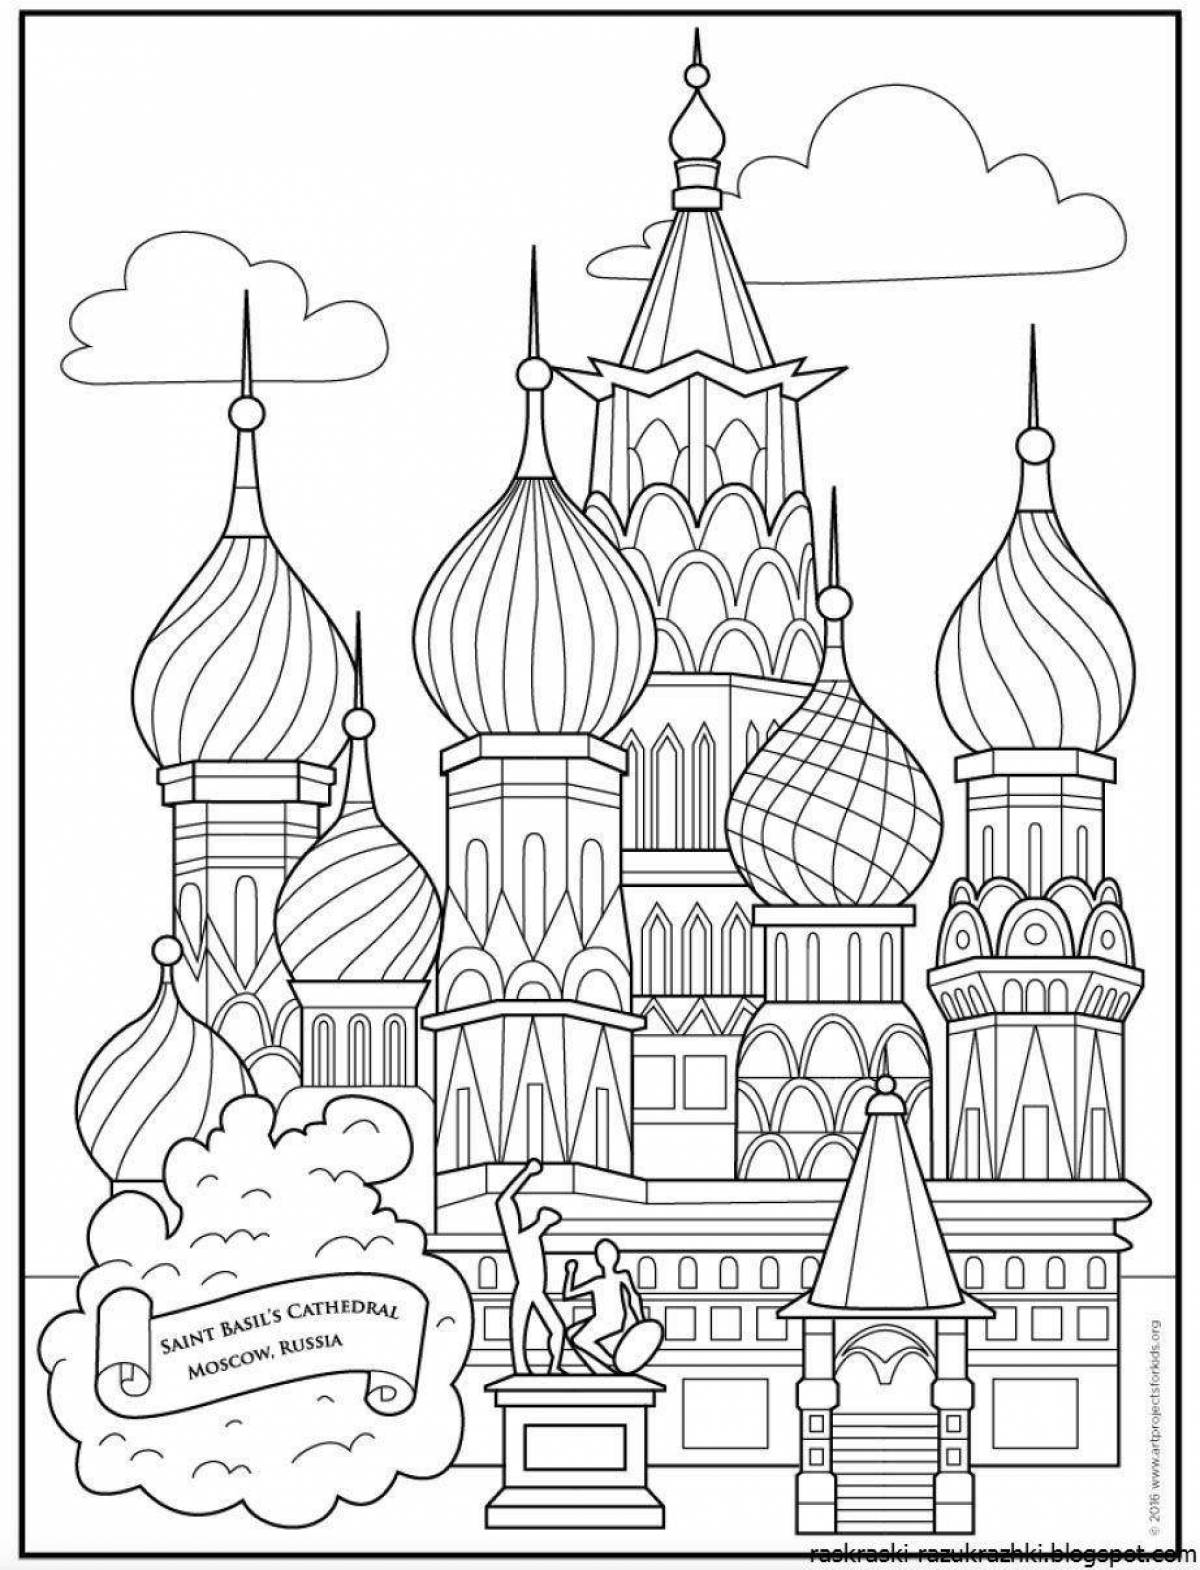 Exquisite Moscow Kremlin coloring book for kids